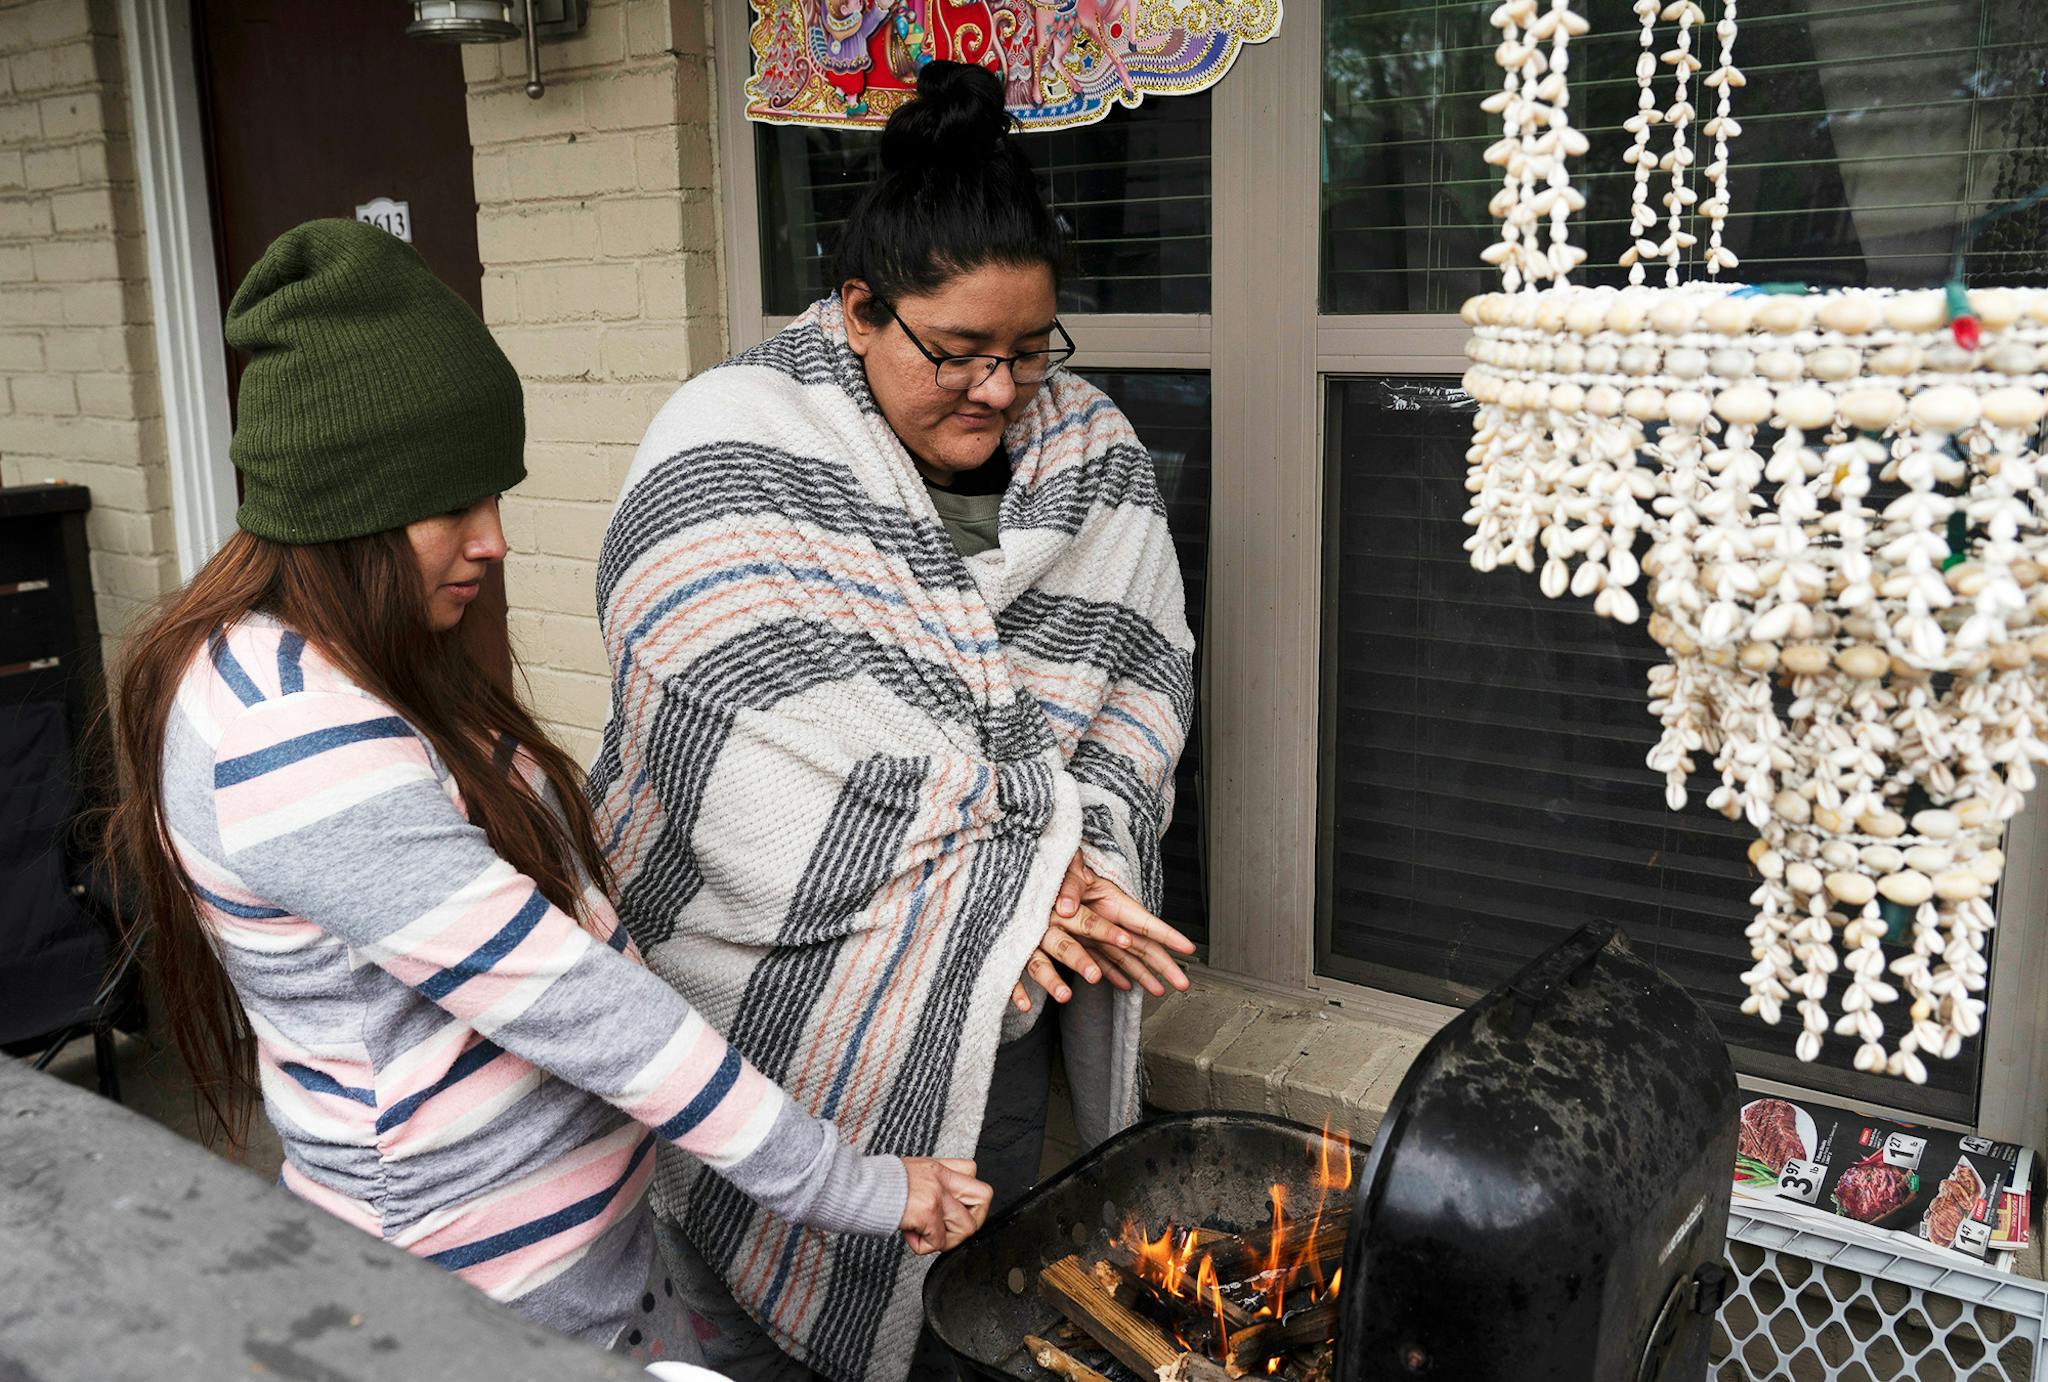 Texans using a BBQ grill as an emergency heat source during the 2021 Texas snow storm.